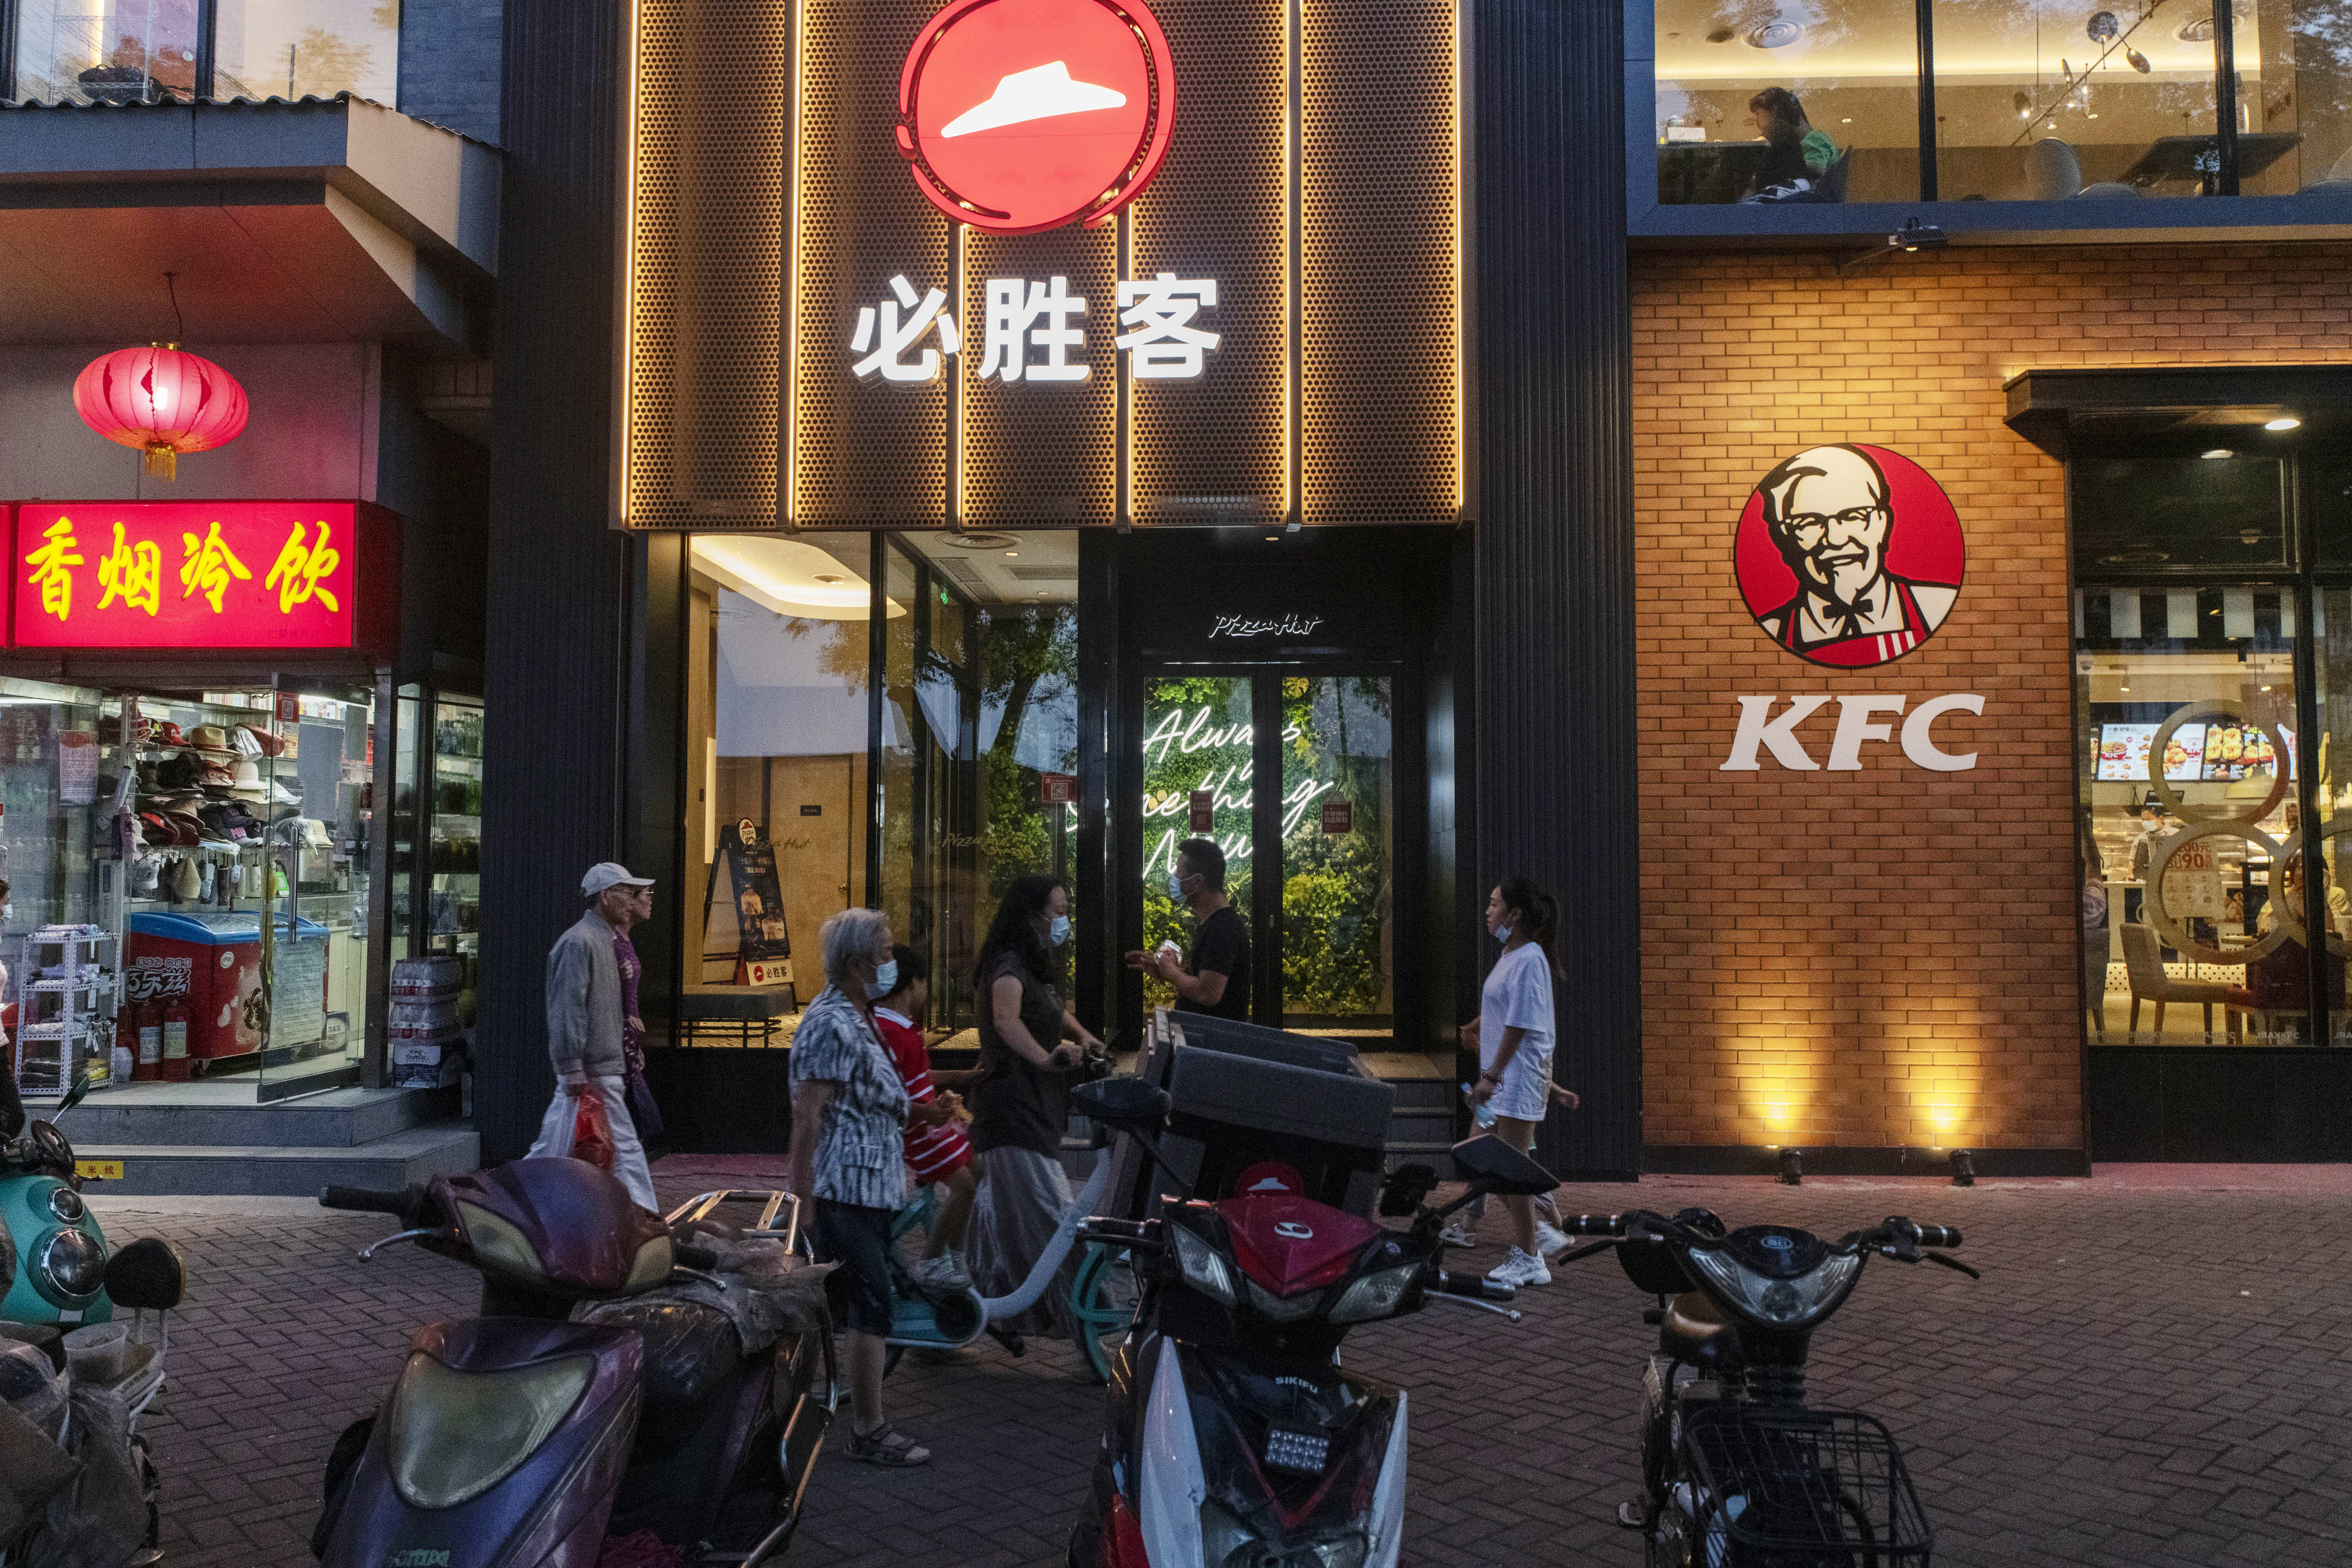 Pedestrians walk past a Pizza Hut restaurant and a KFC restaurant, both operated by Yum China, in Beijing. Photo: Bloomberg